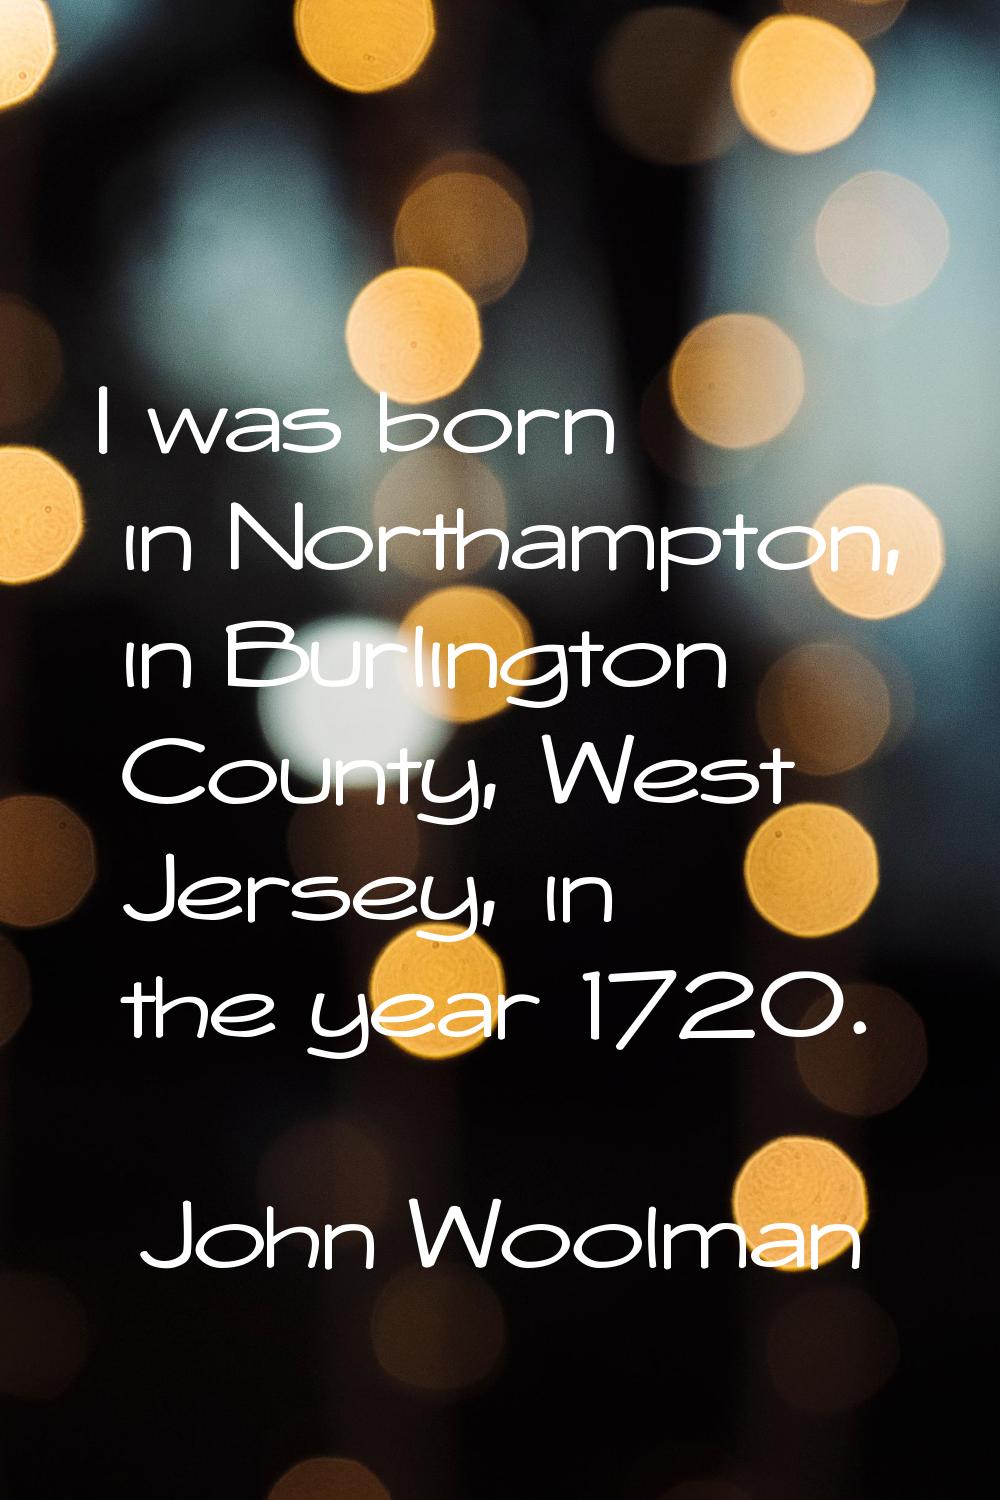 I was born in Northampton, in Burlington County, West Jersey, in the year 1720.